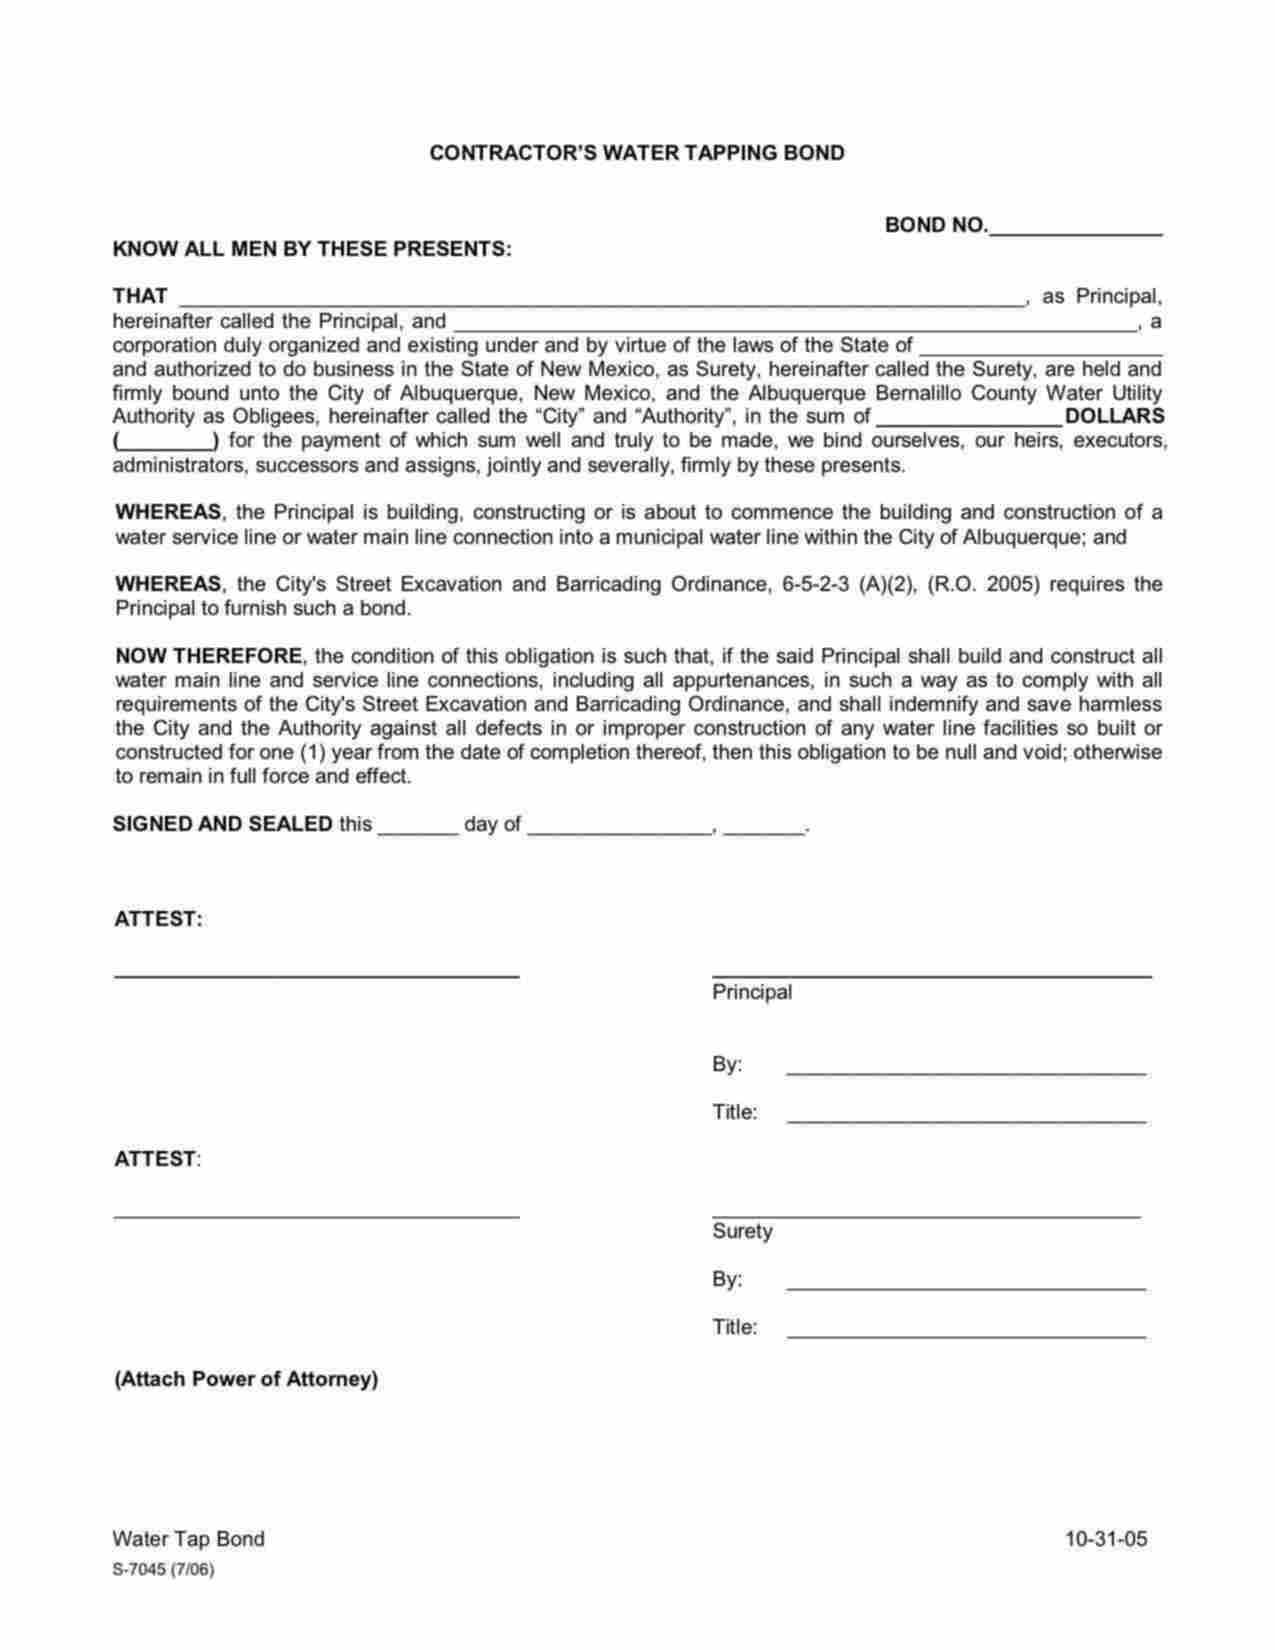 New Mexico Contractor's Water Tapping Bond Form